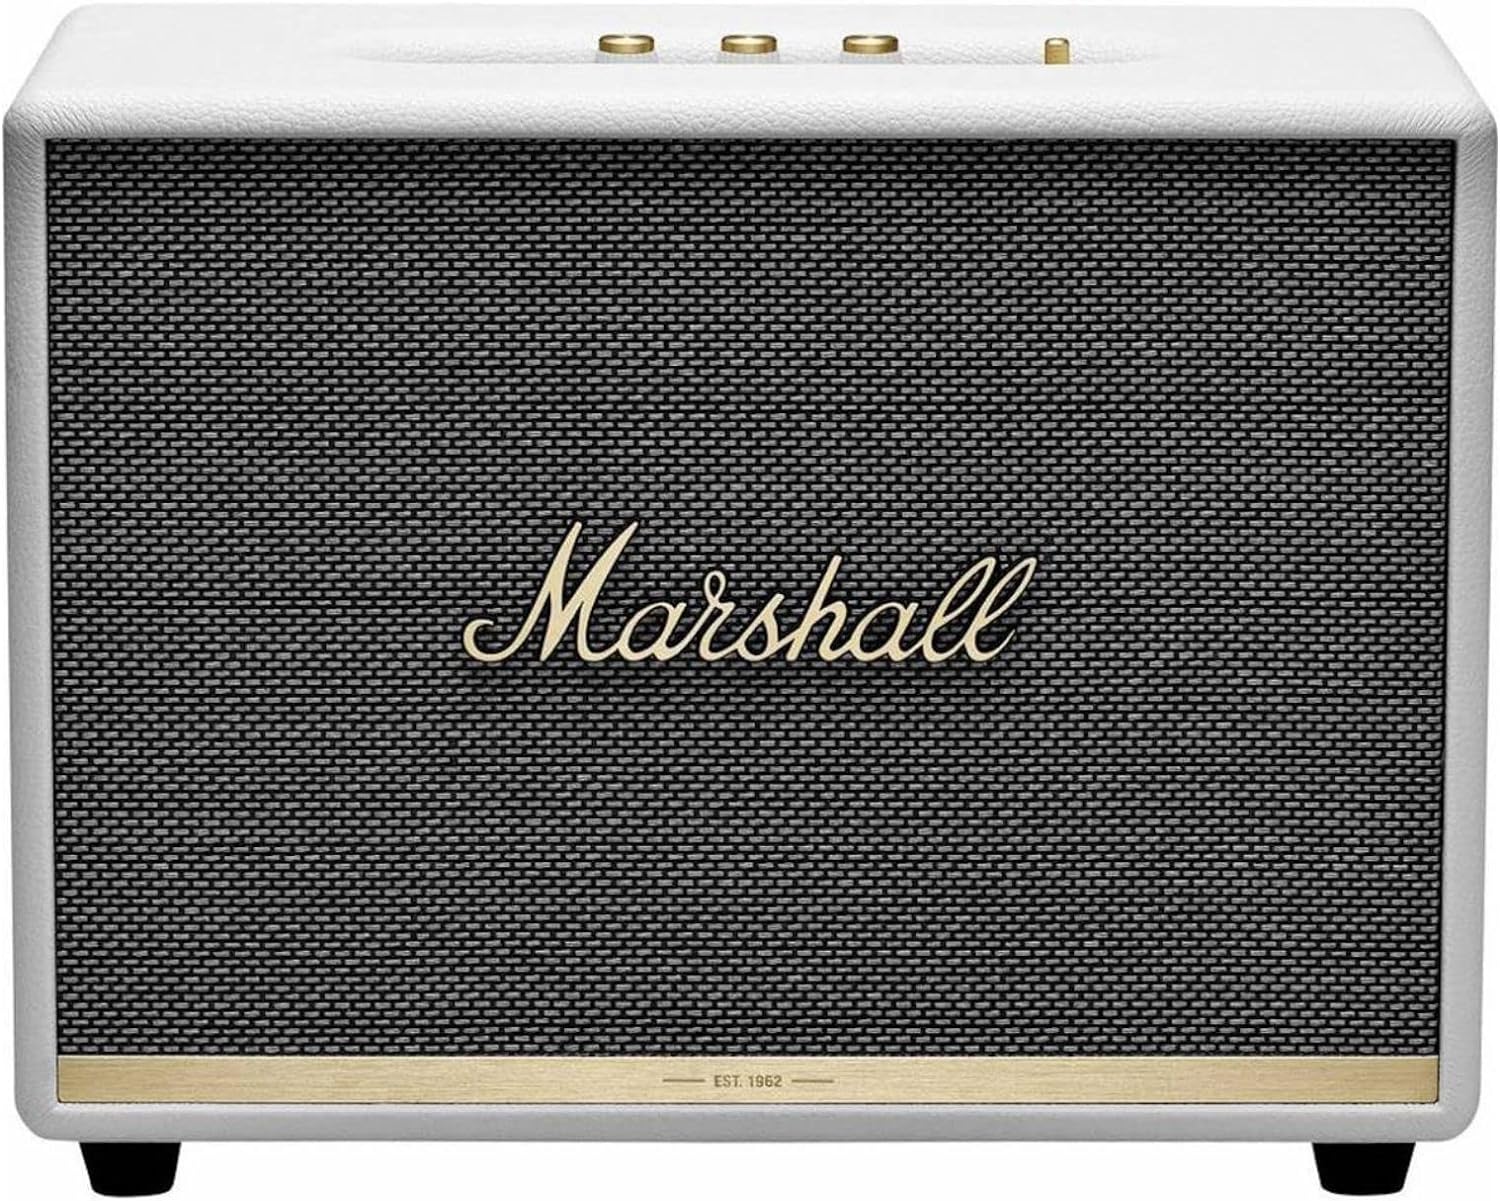 Marshall Woburn II Wireless Speaker in White - Powerful sound with clear trebles and deep bass. 7340055358248